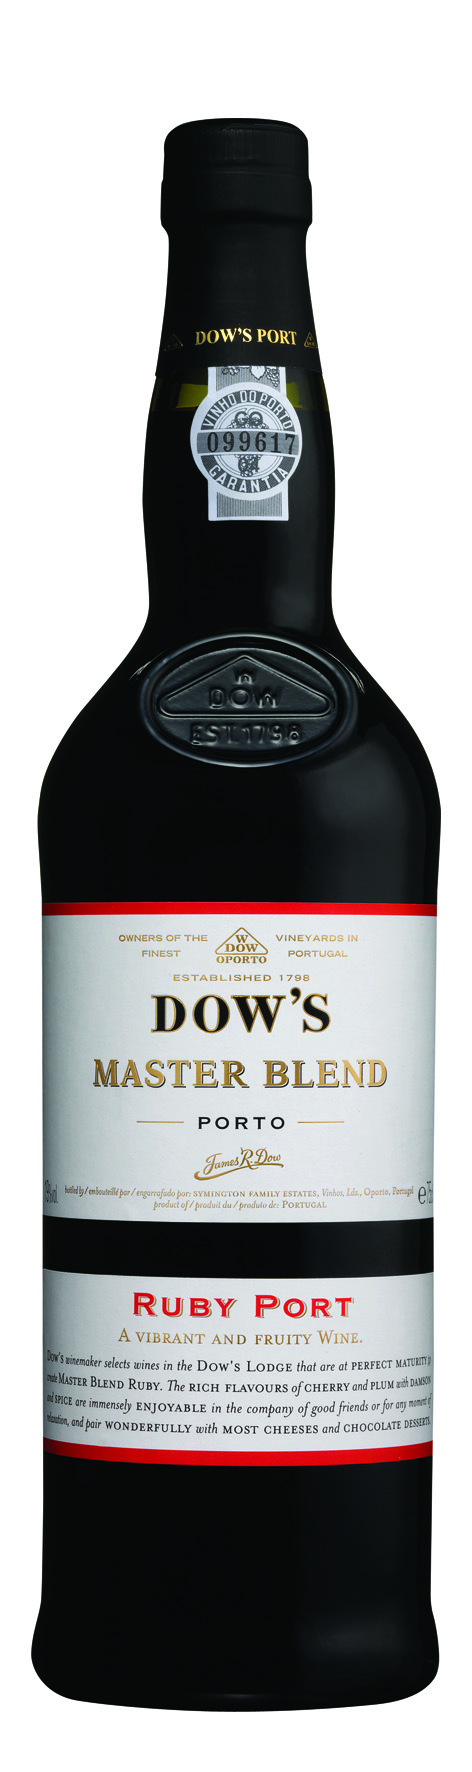 DOW's Masterblend Ruby Port